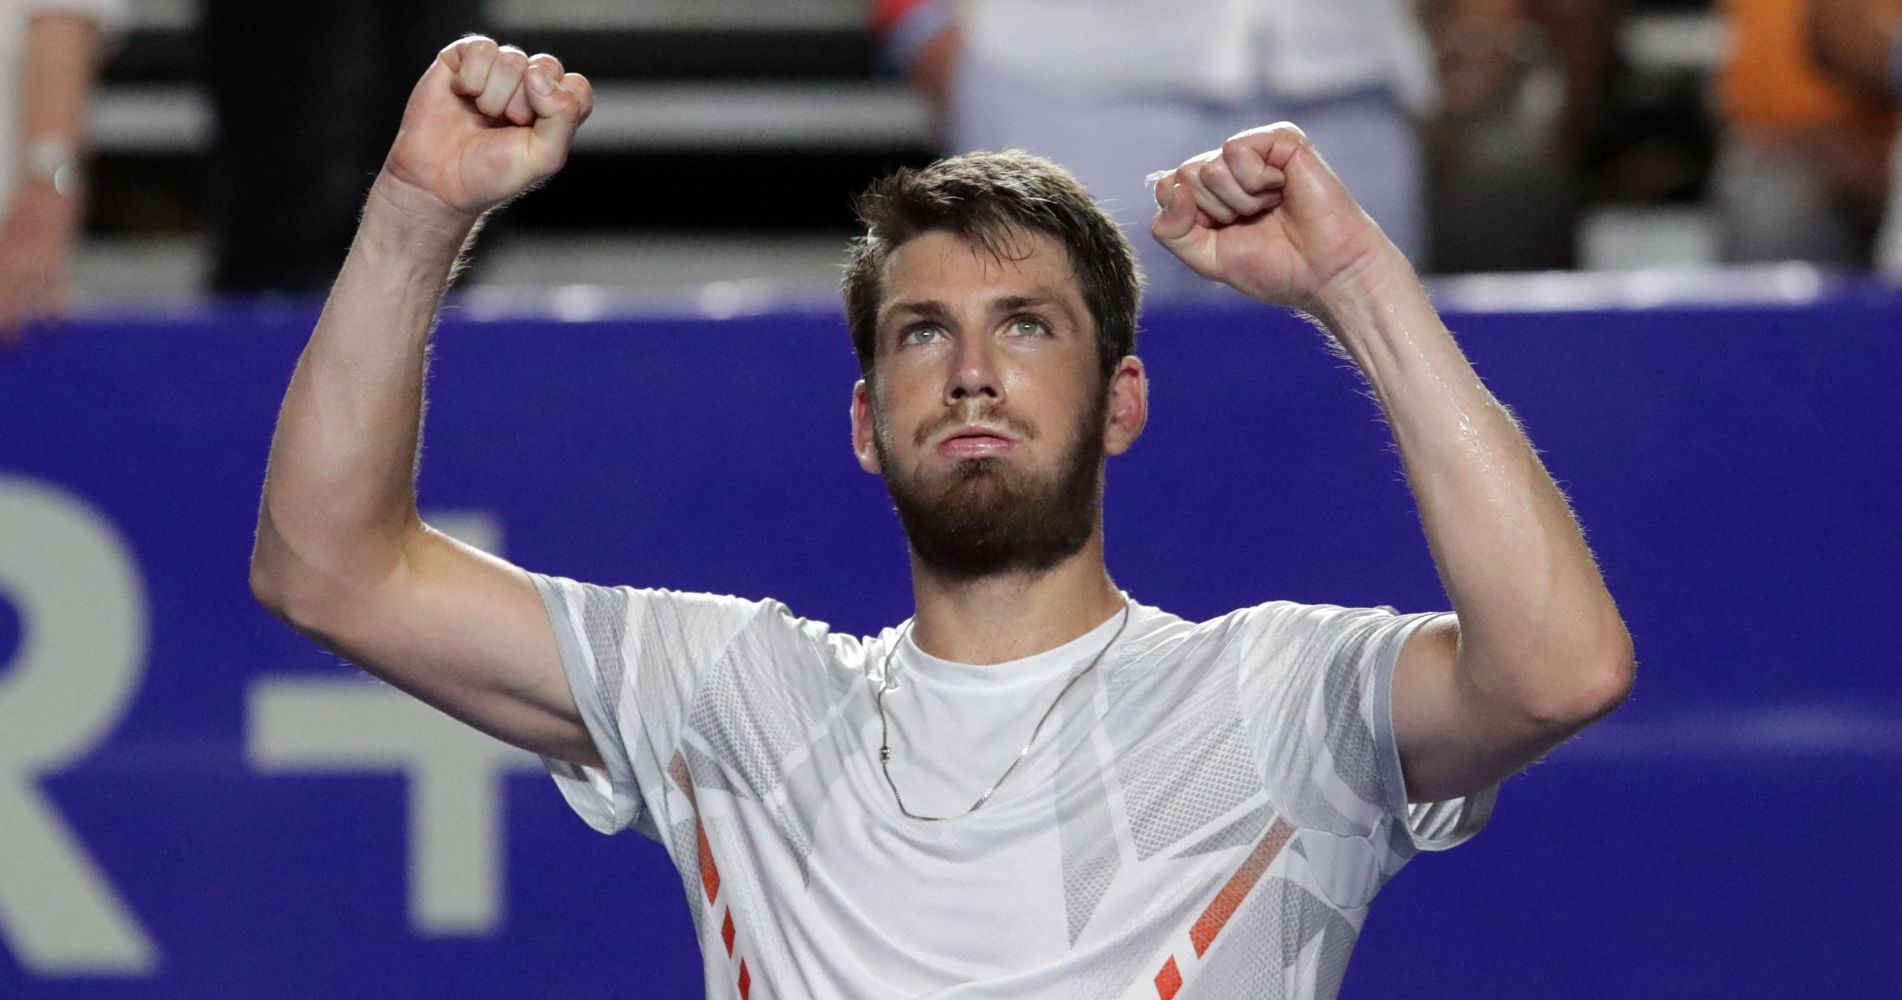 Britain's Cameron Norrie celebrates after winning his semifinal match against Greece's Stefanos Tsitsipas at the Abierto Mexicano Open in Acapulco